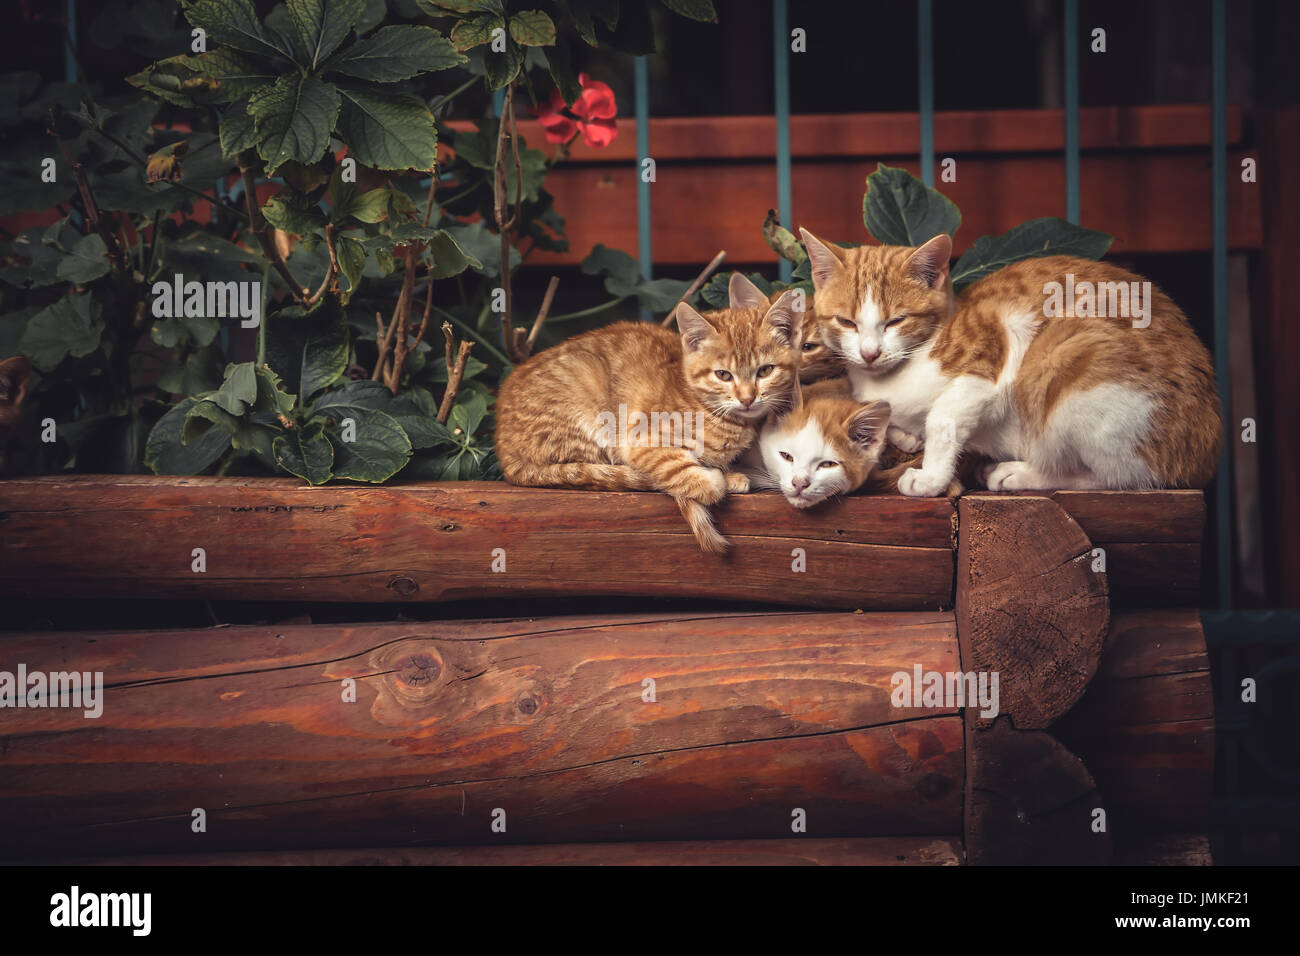 Cute red cats family together with kitten resting on wooden logs in rural countryside village in vintage rustic style Stock Photo